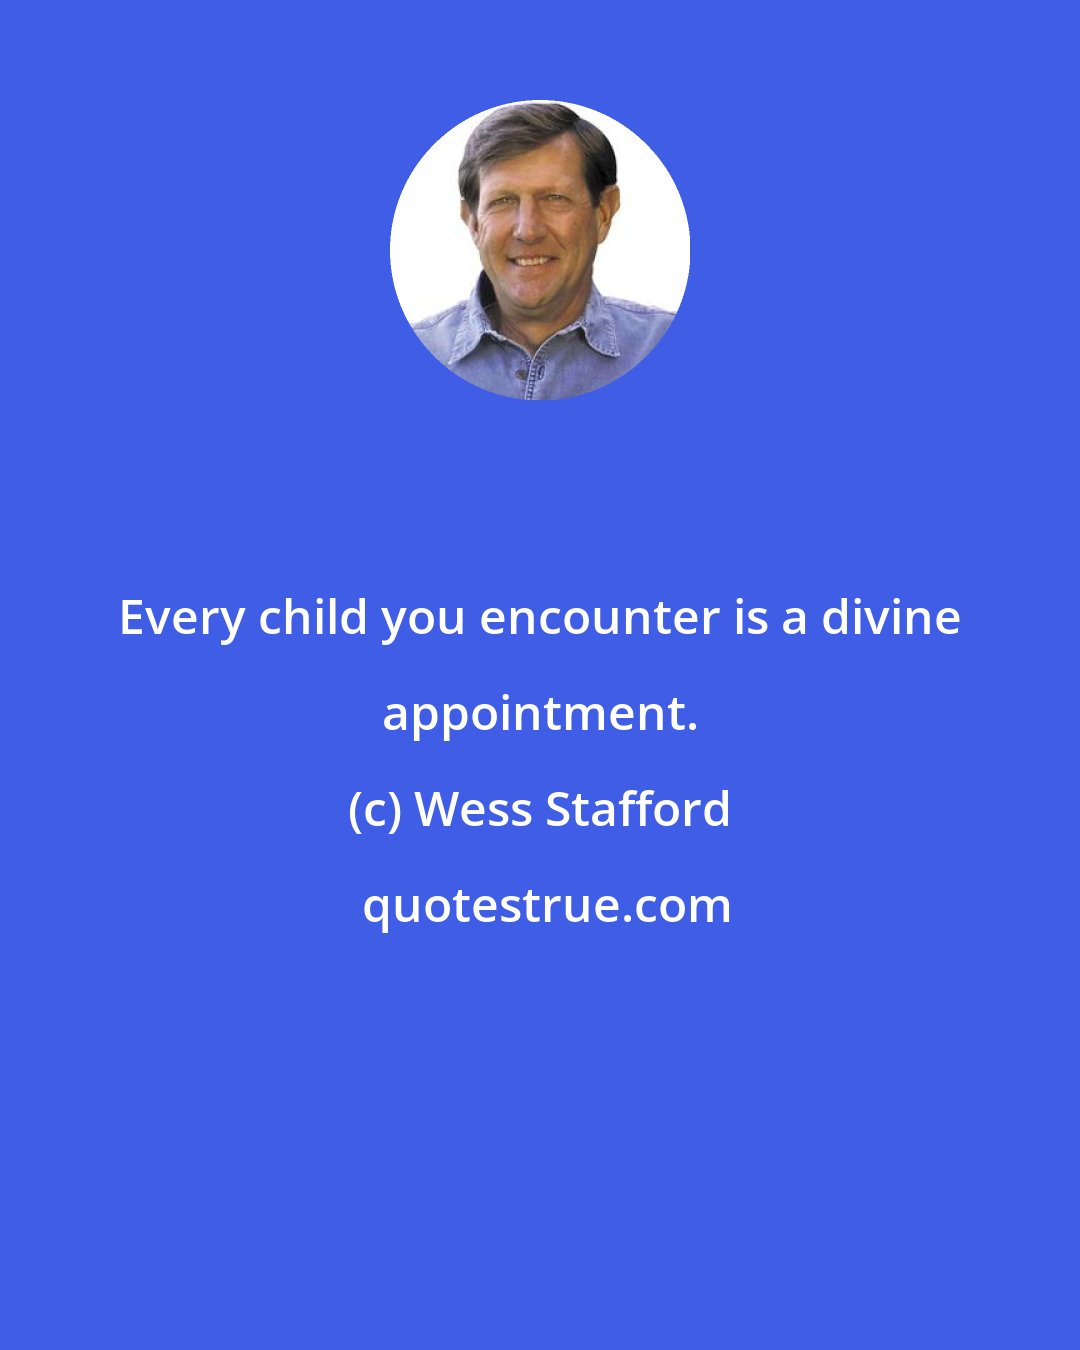 Wess Stafford: Every child you encounter is a divine appointment.